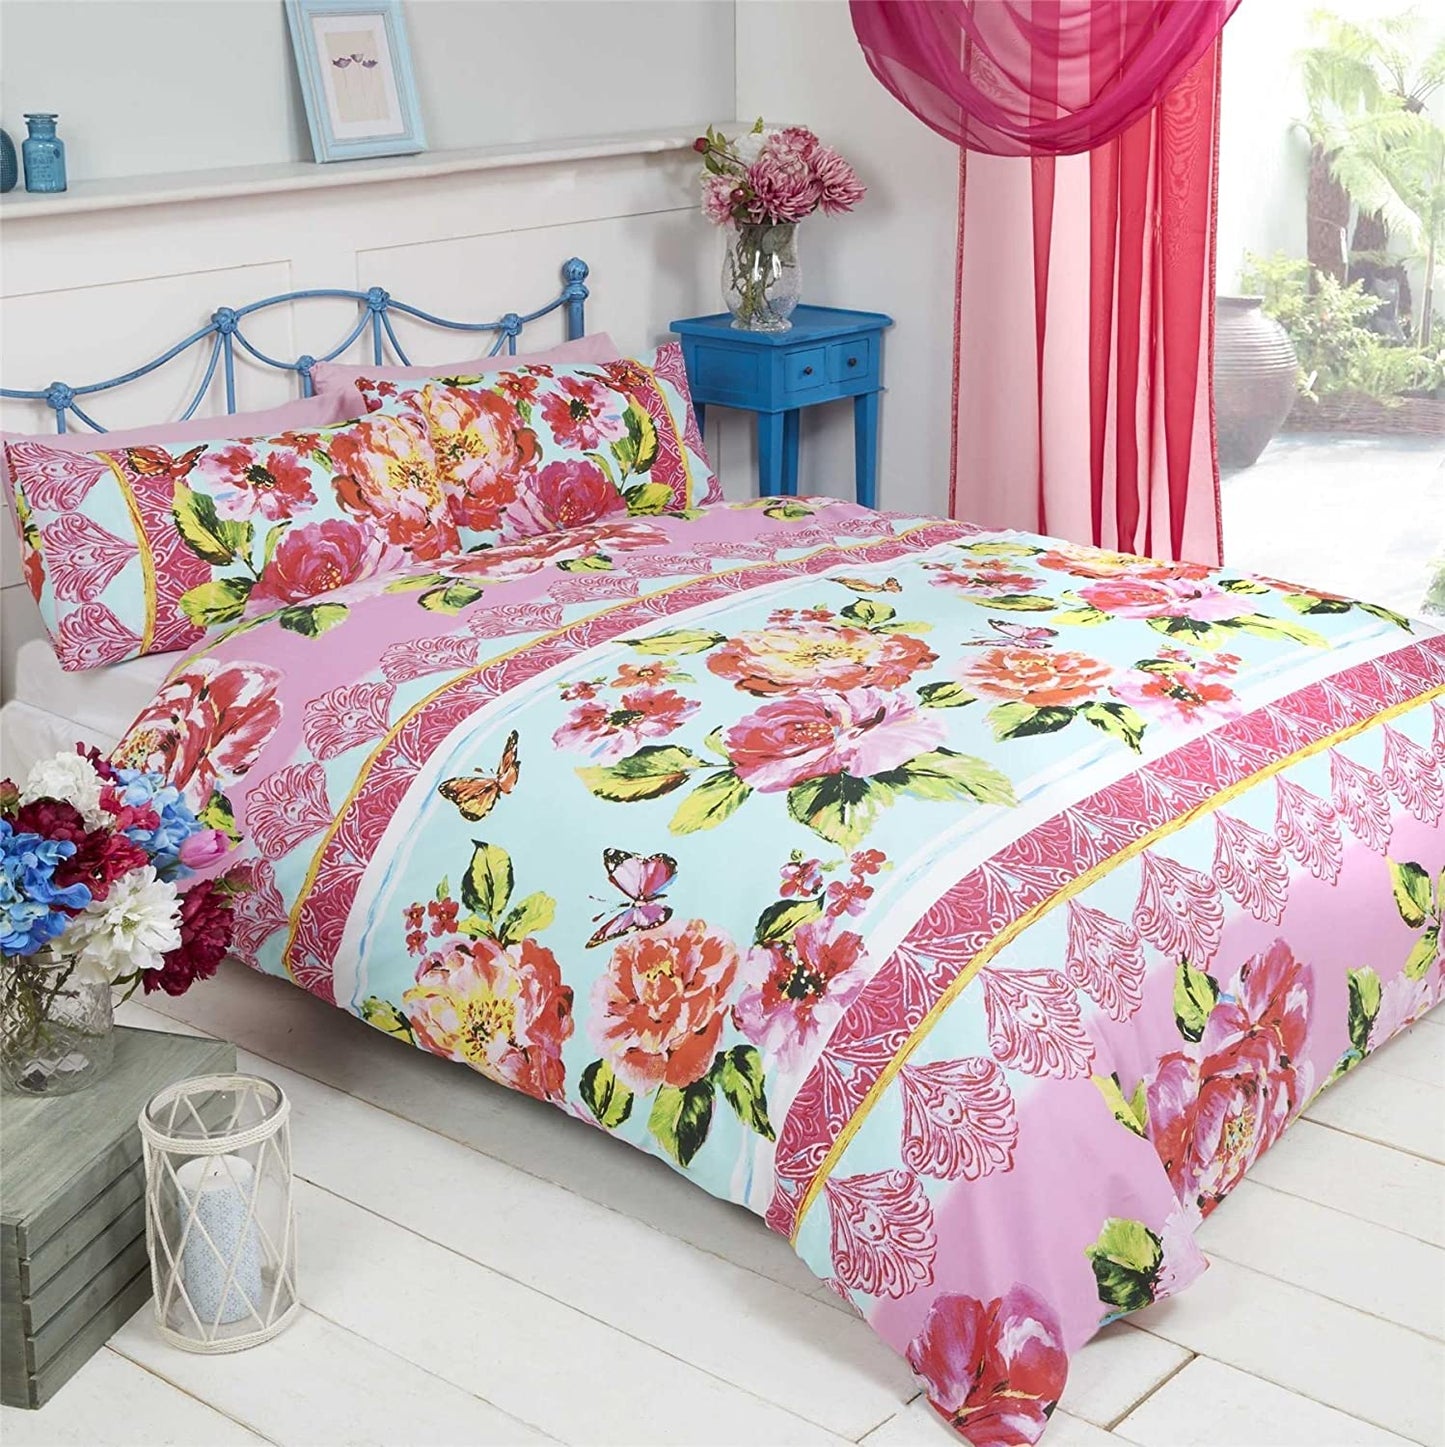 Double Bed Flowers Pink Green Butterflies Duvet Cover Set Sanaa Floral Pink